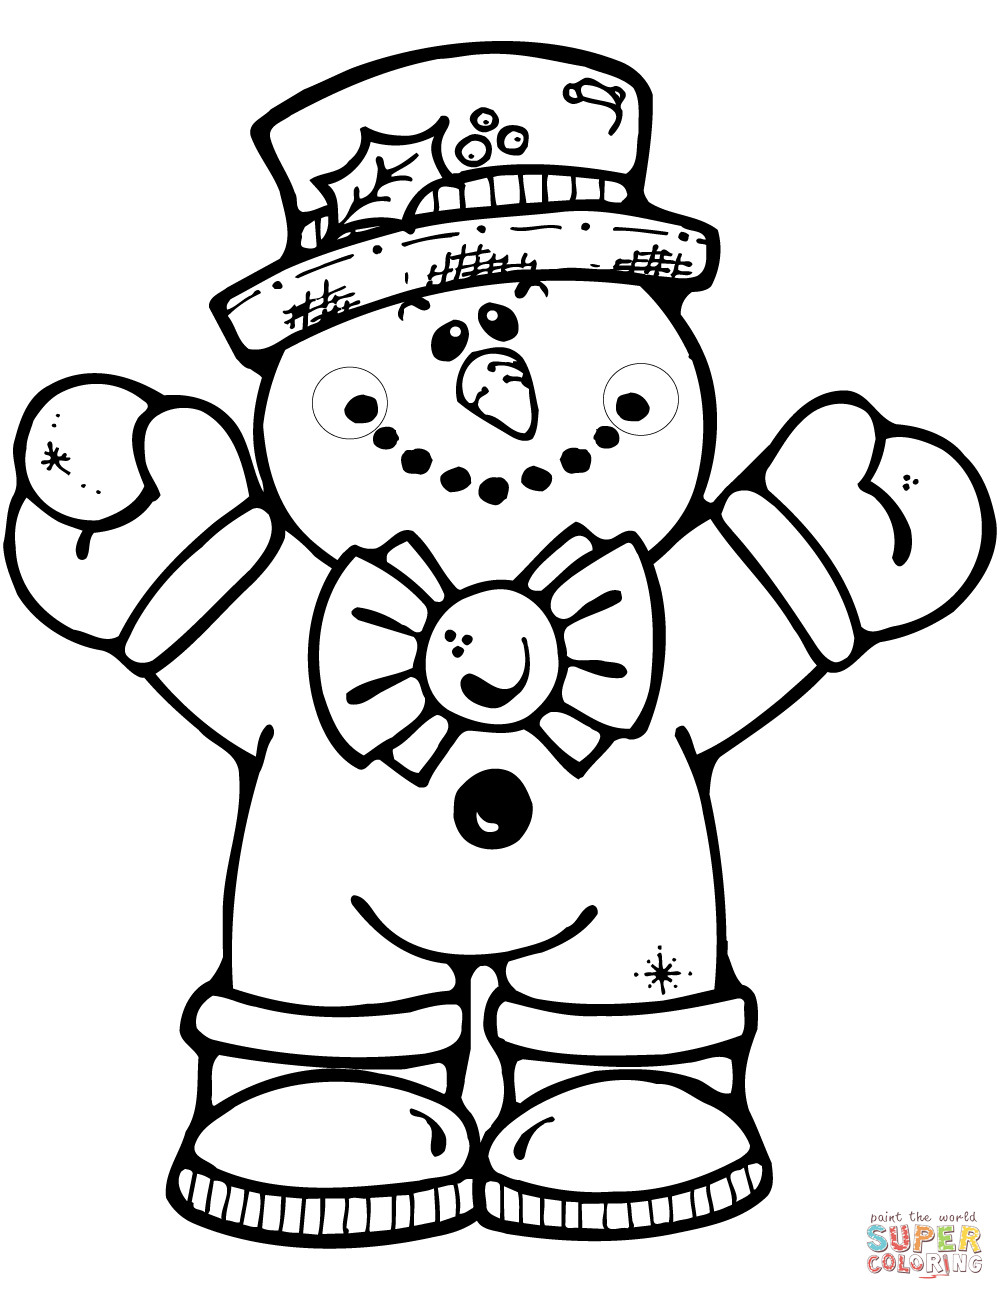 Snowman Coloring Pages Printable
 Hugging Snowman coloring page